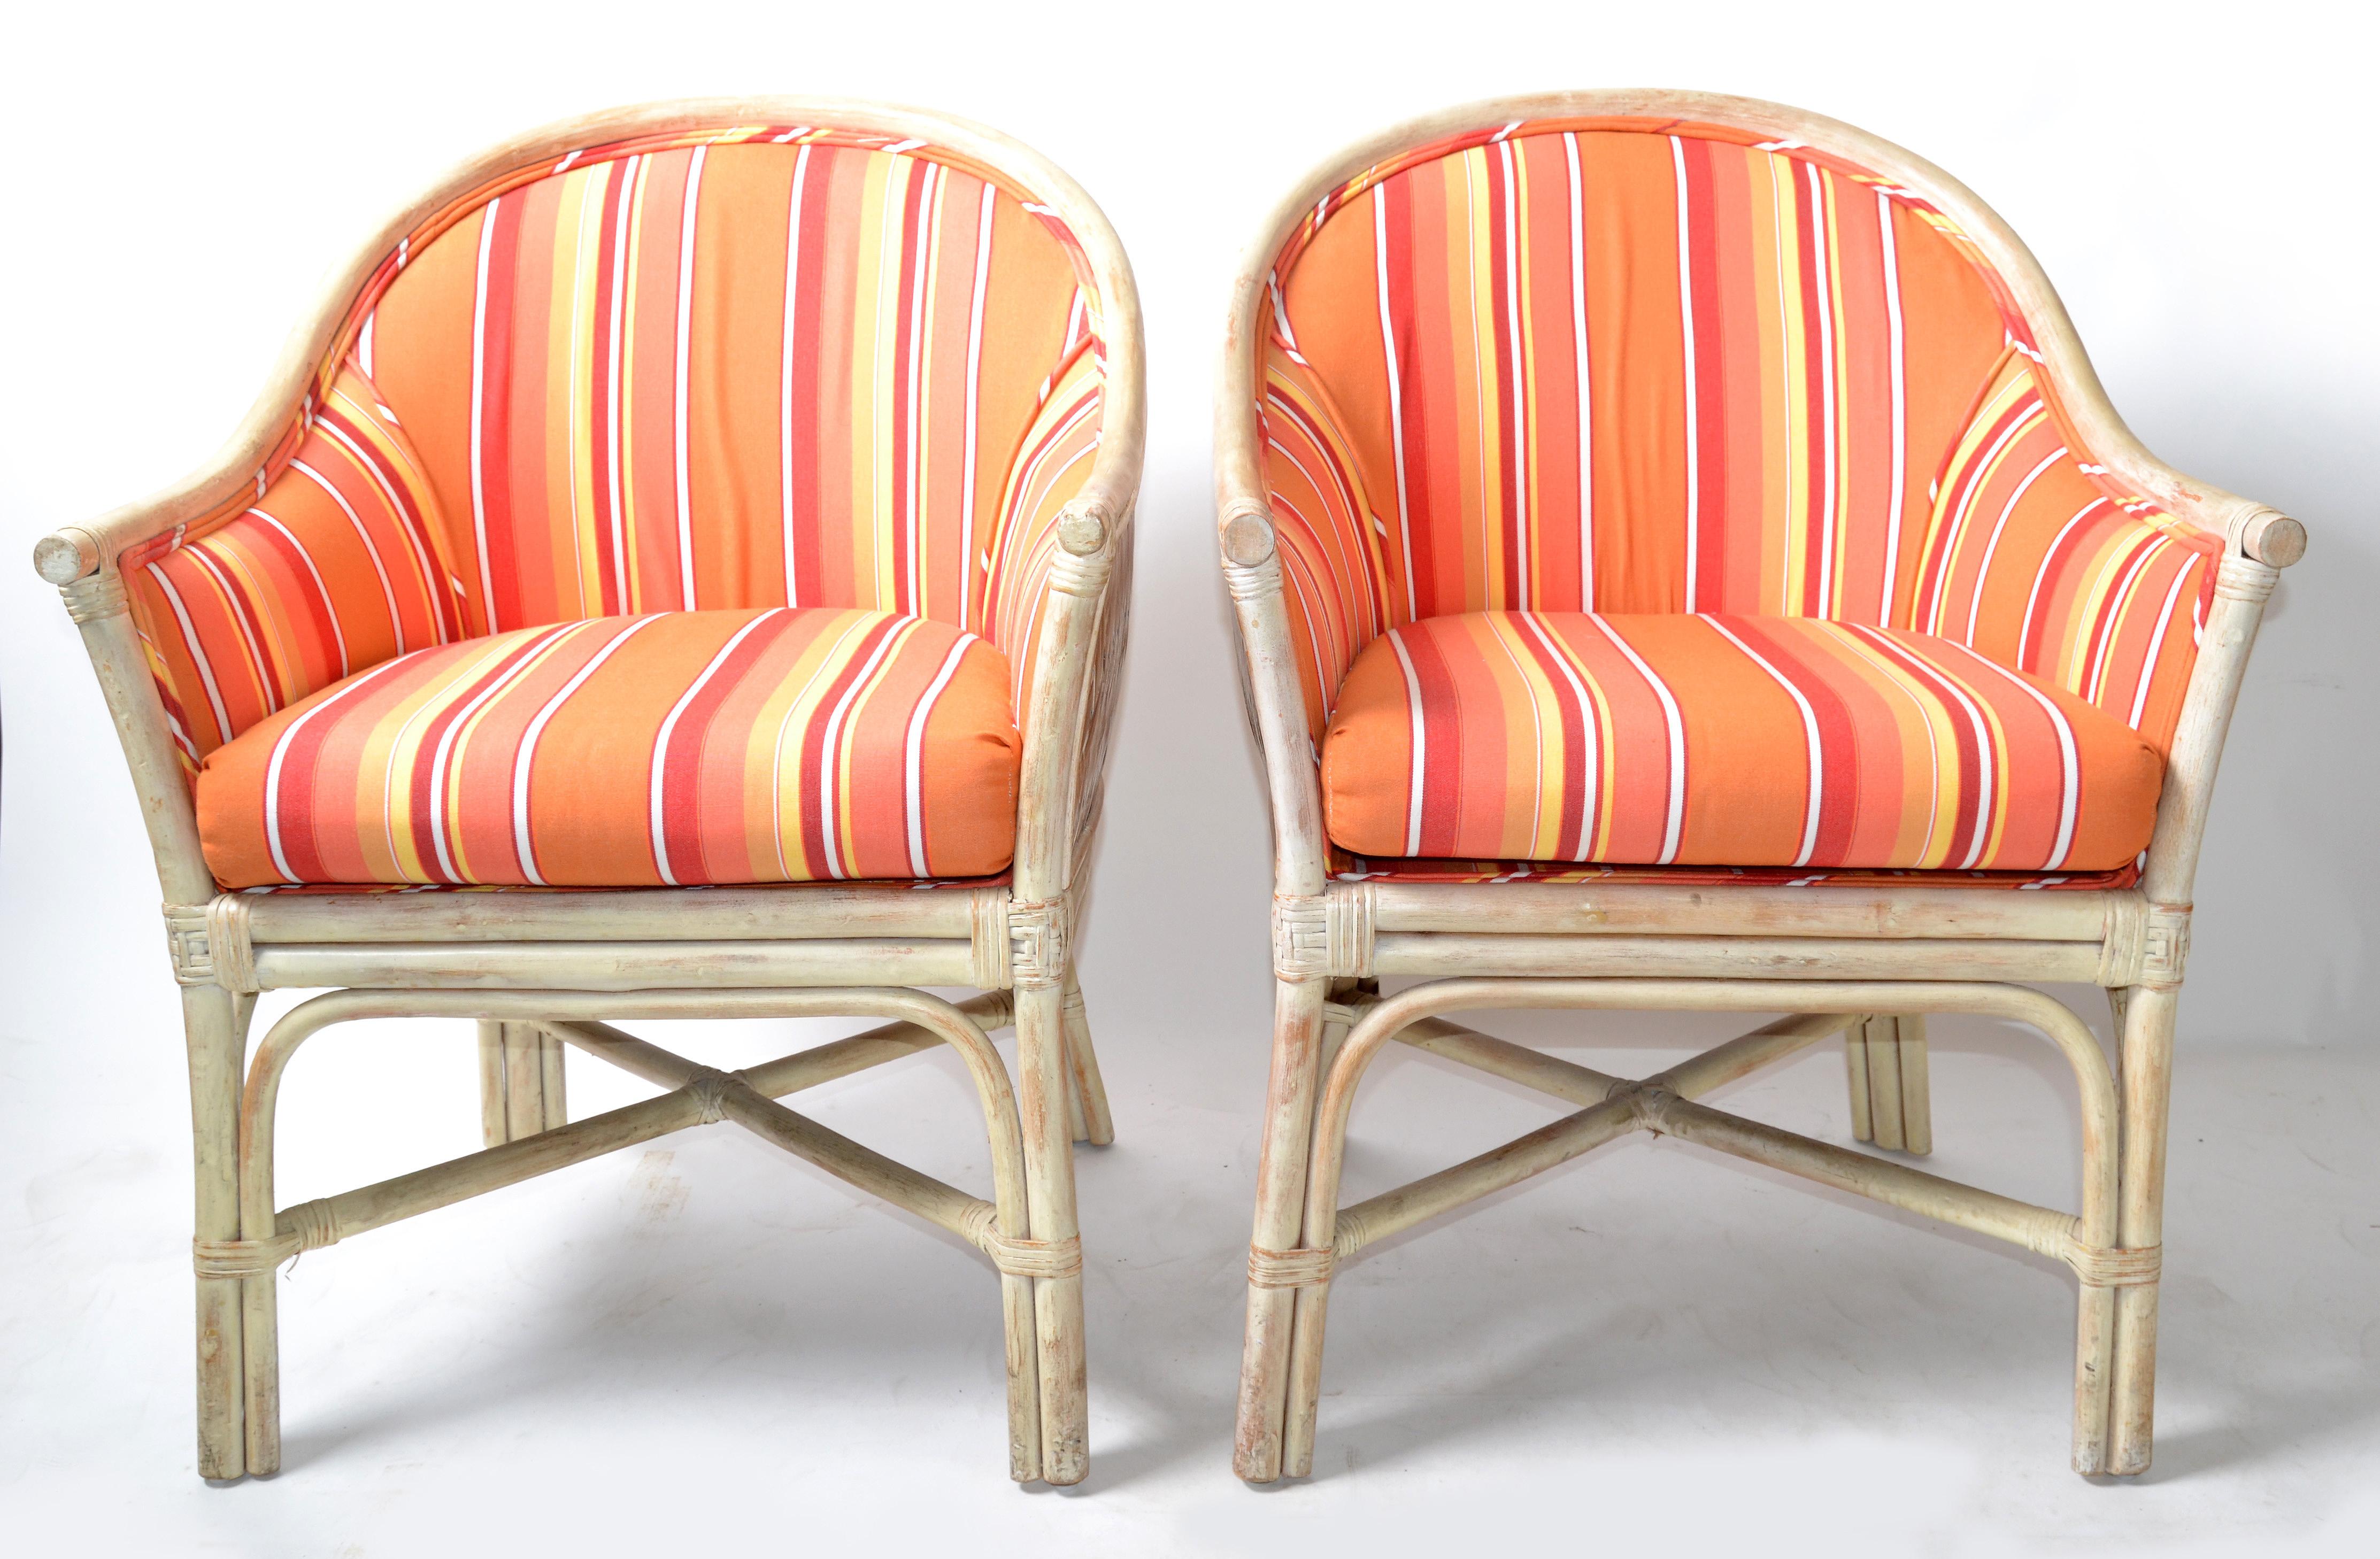 American Pair, Mid-Century Modern Bamboo & Cane Armchair Orange Striped Upholstery, 1970 For Sale